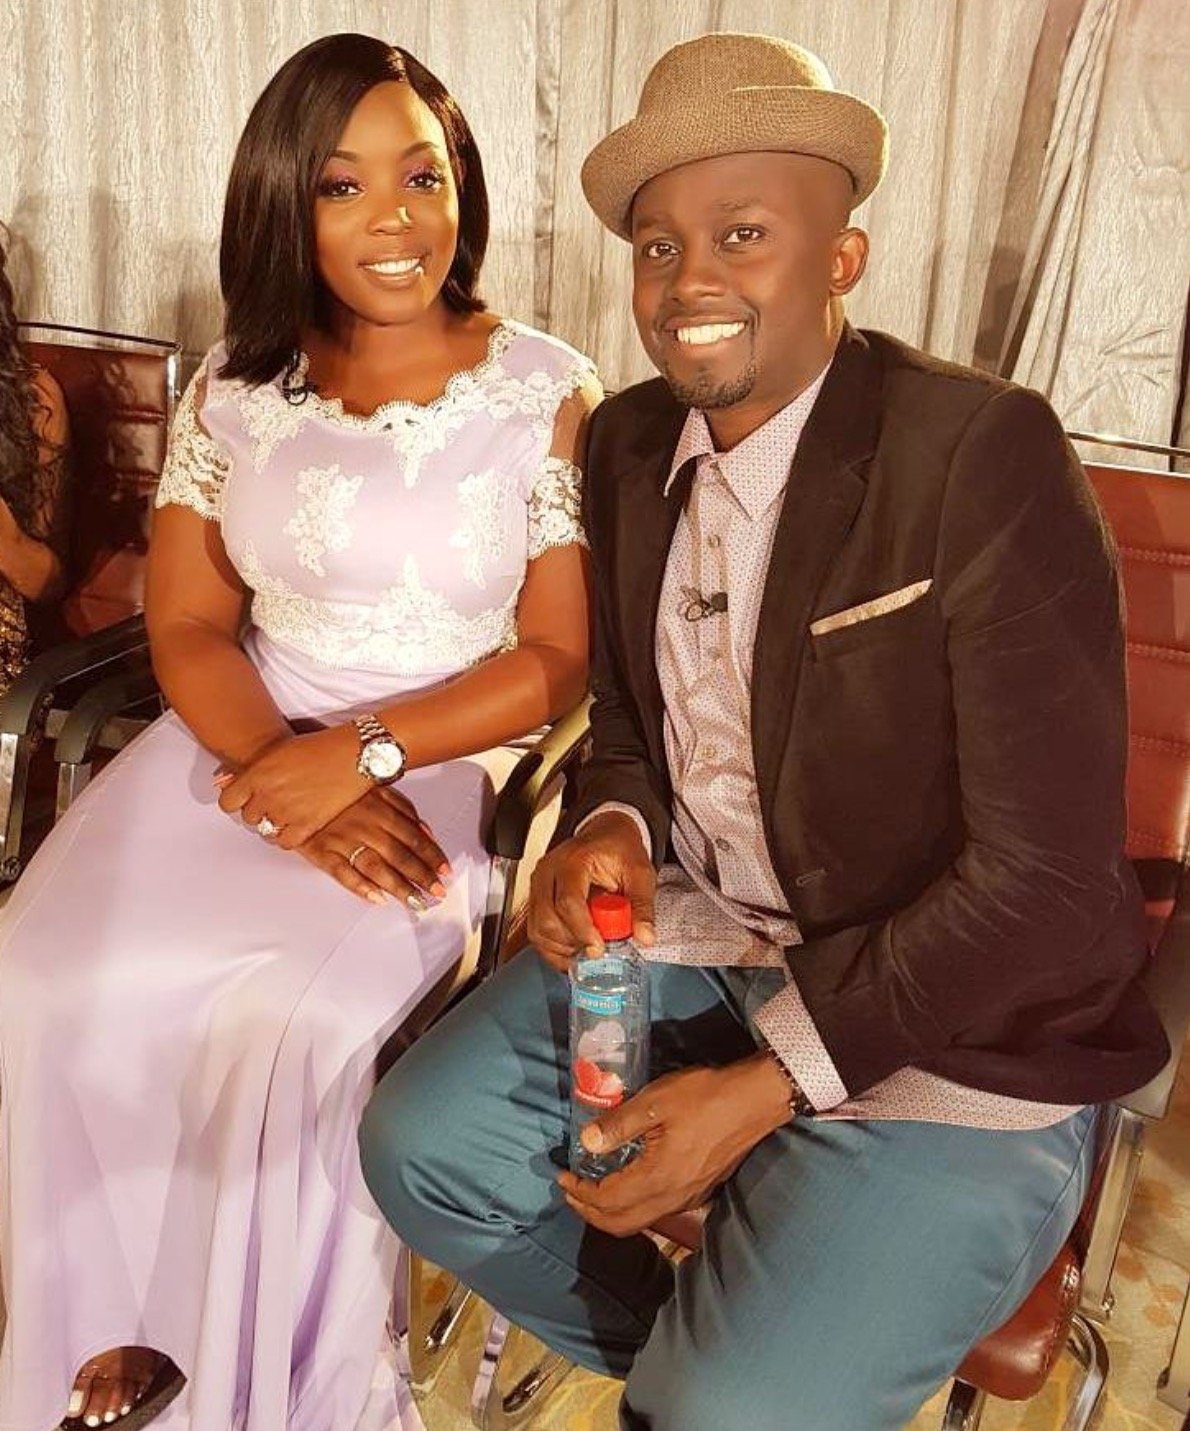 The incredible mega mansion Risper and her fiancé are planning to move into right after their wedding